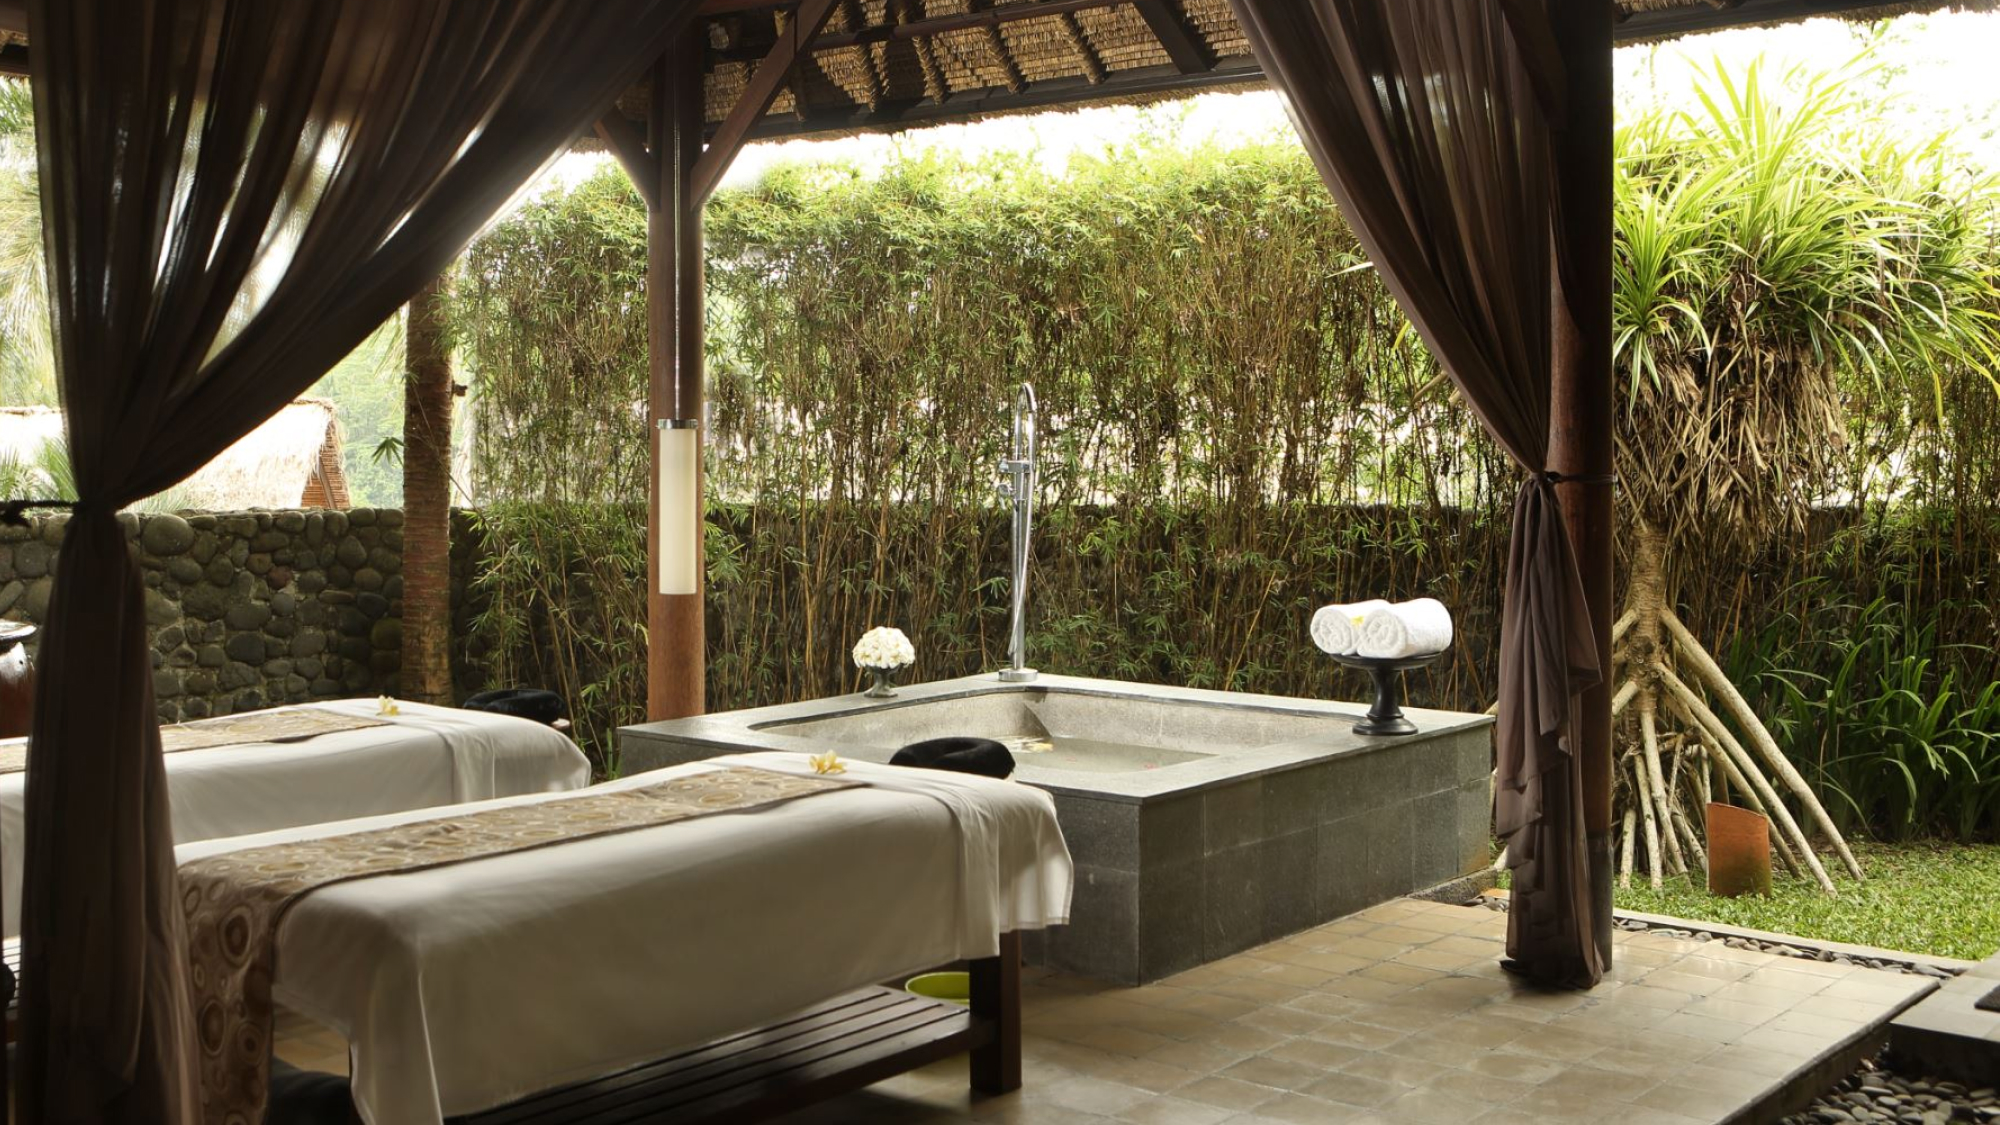 massage beds and pool at the ubud spa